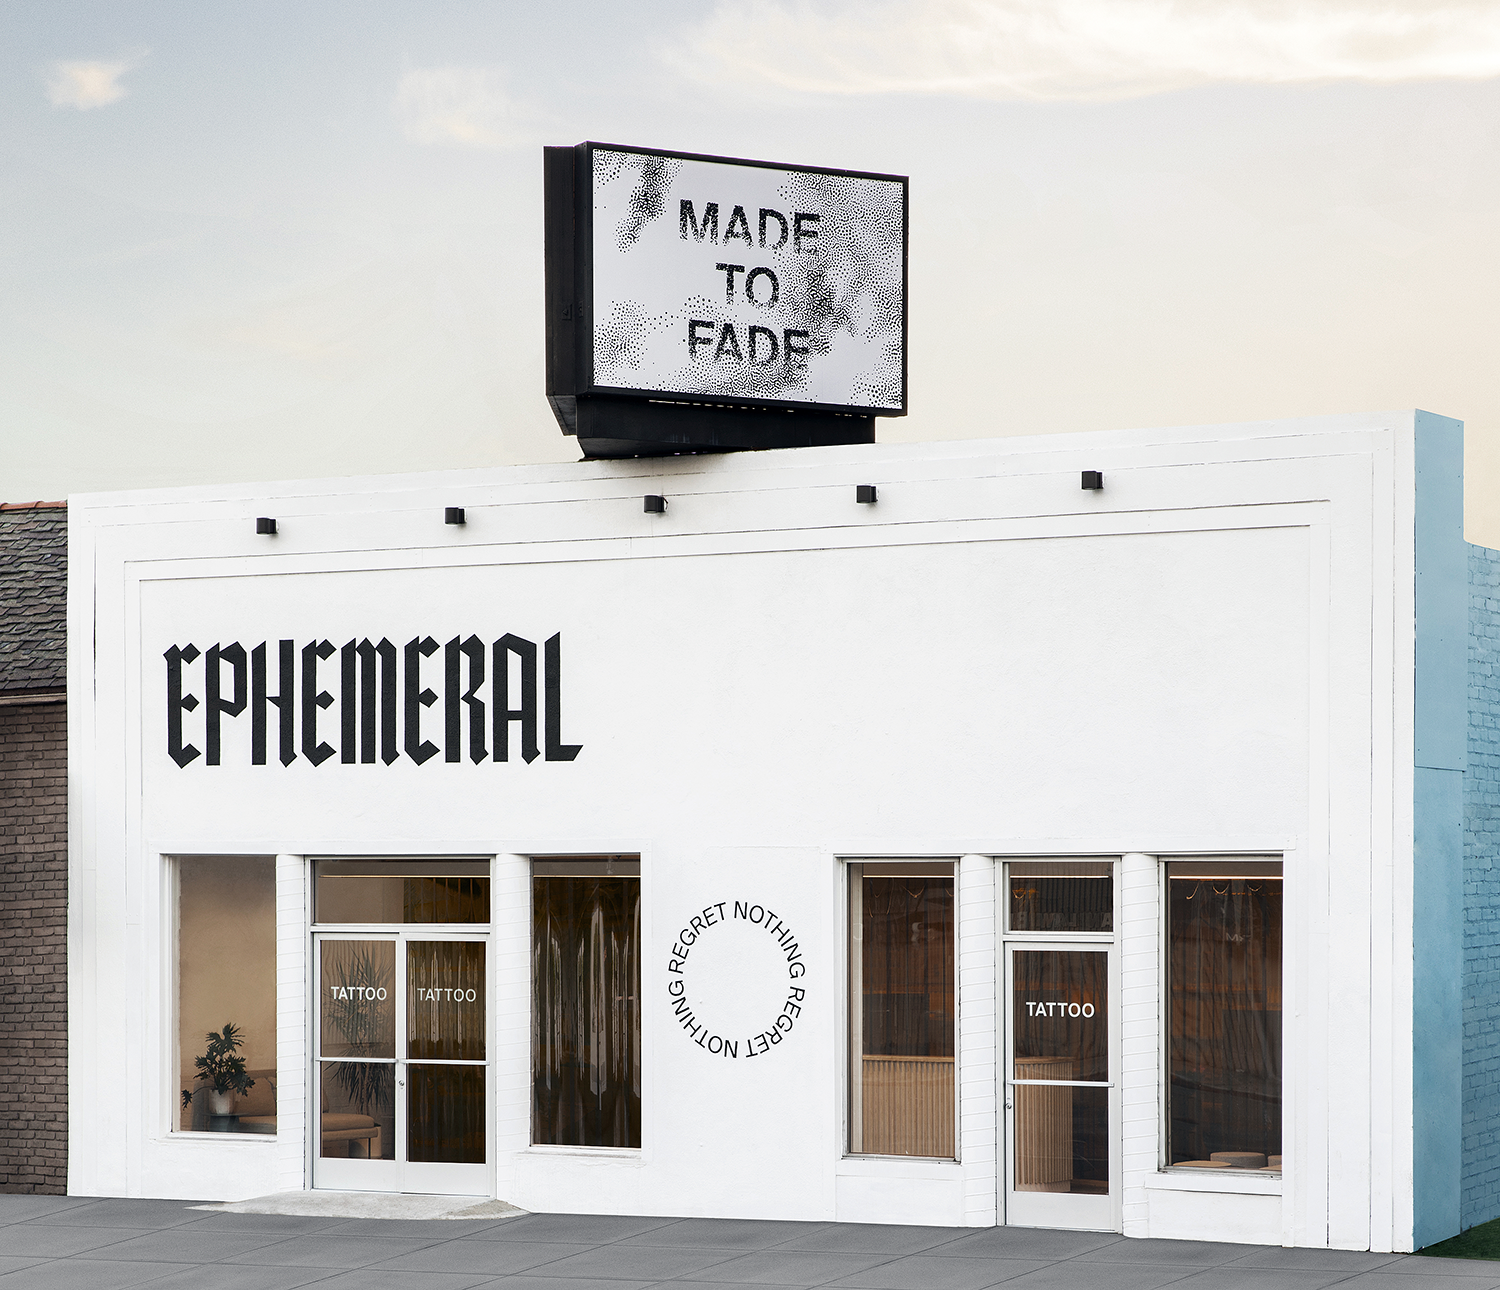 Ephemeral Tattoo specializes in ink that fades in a year